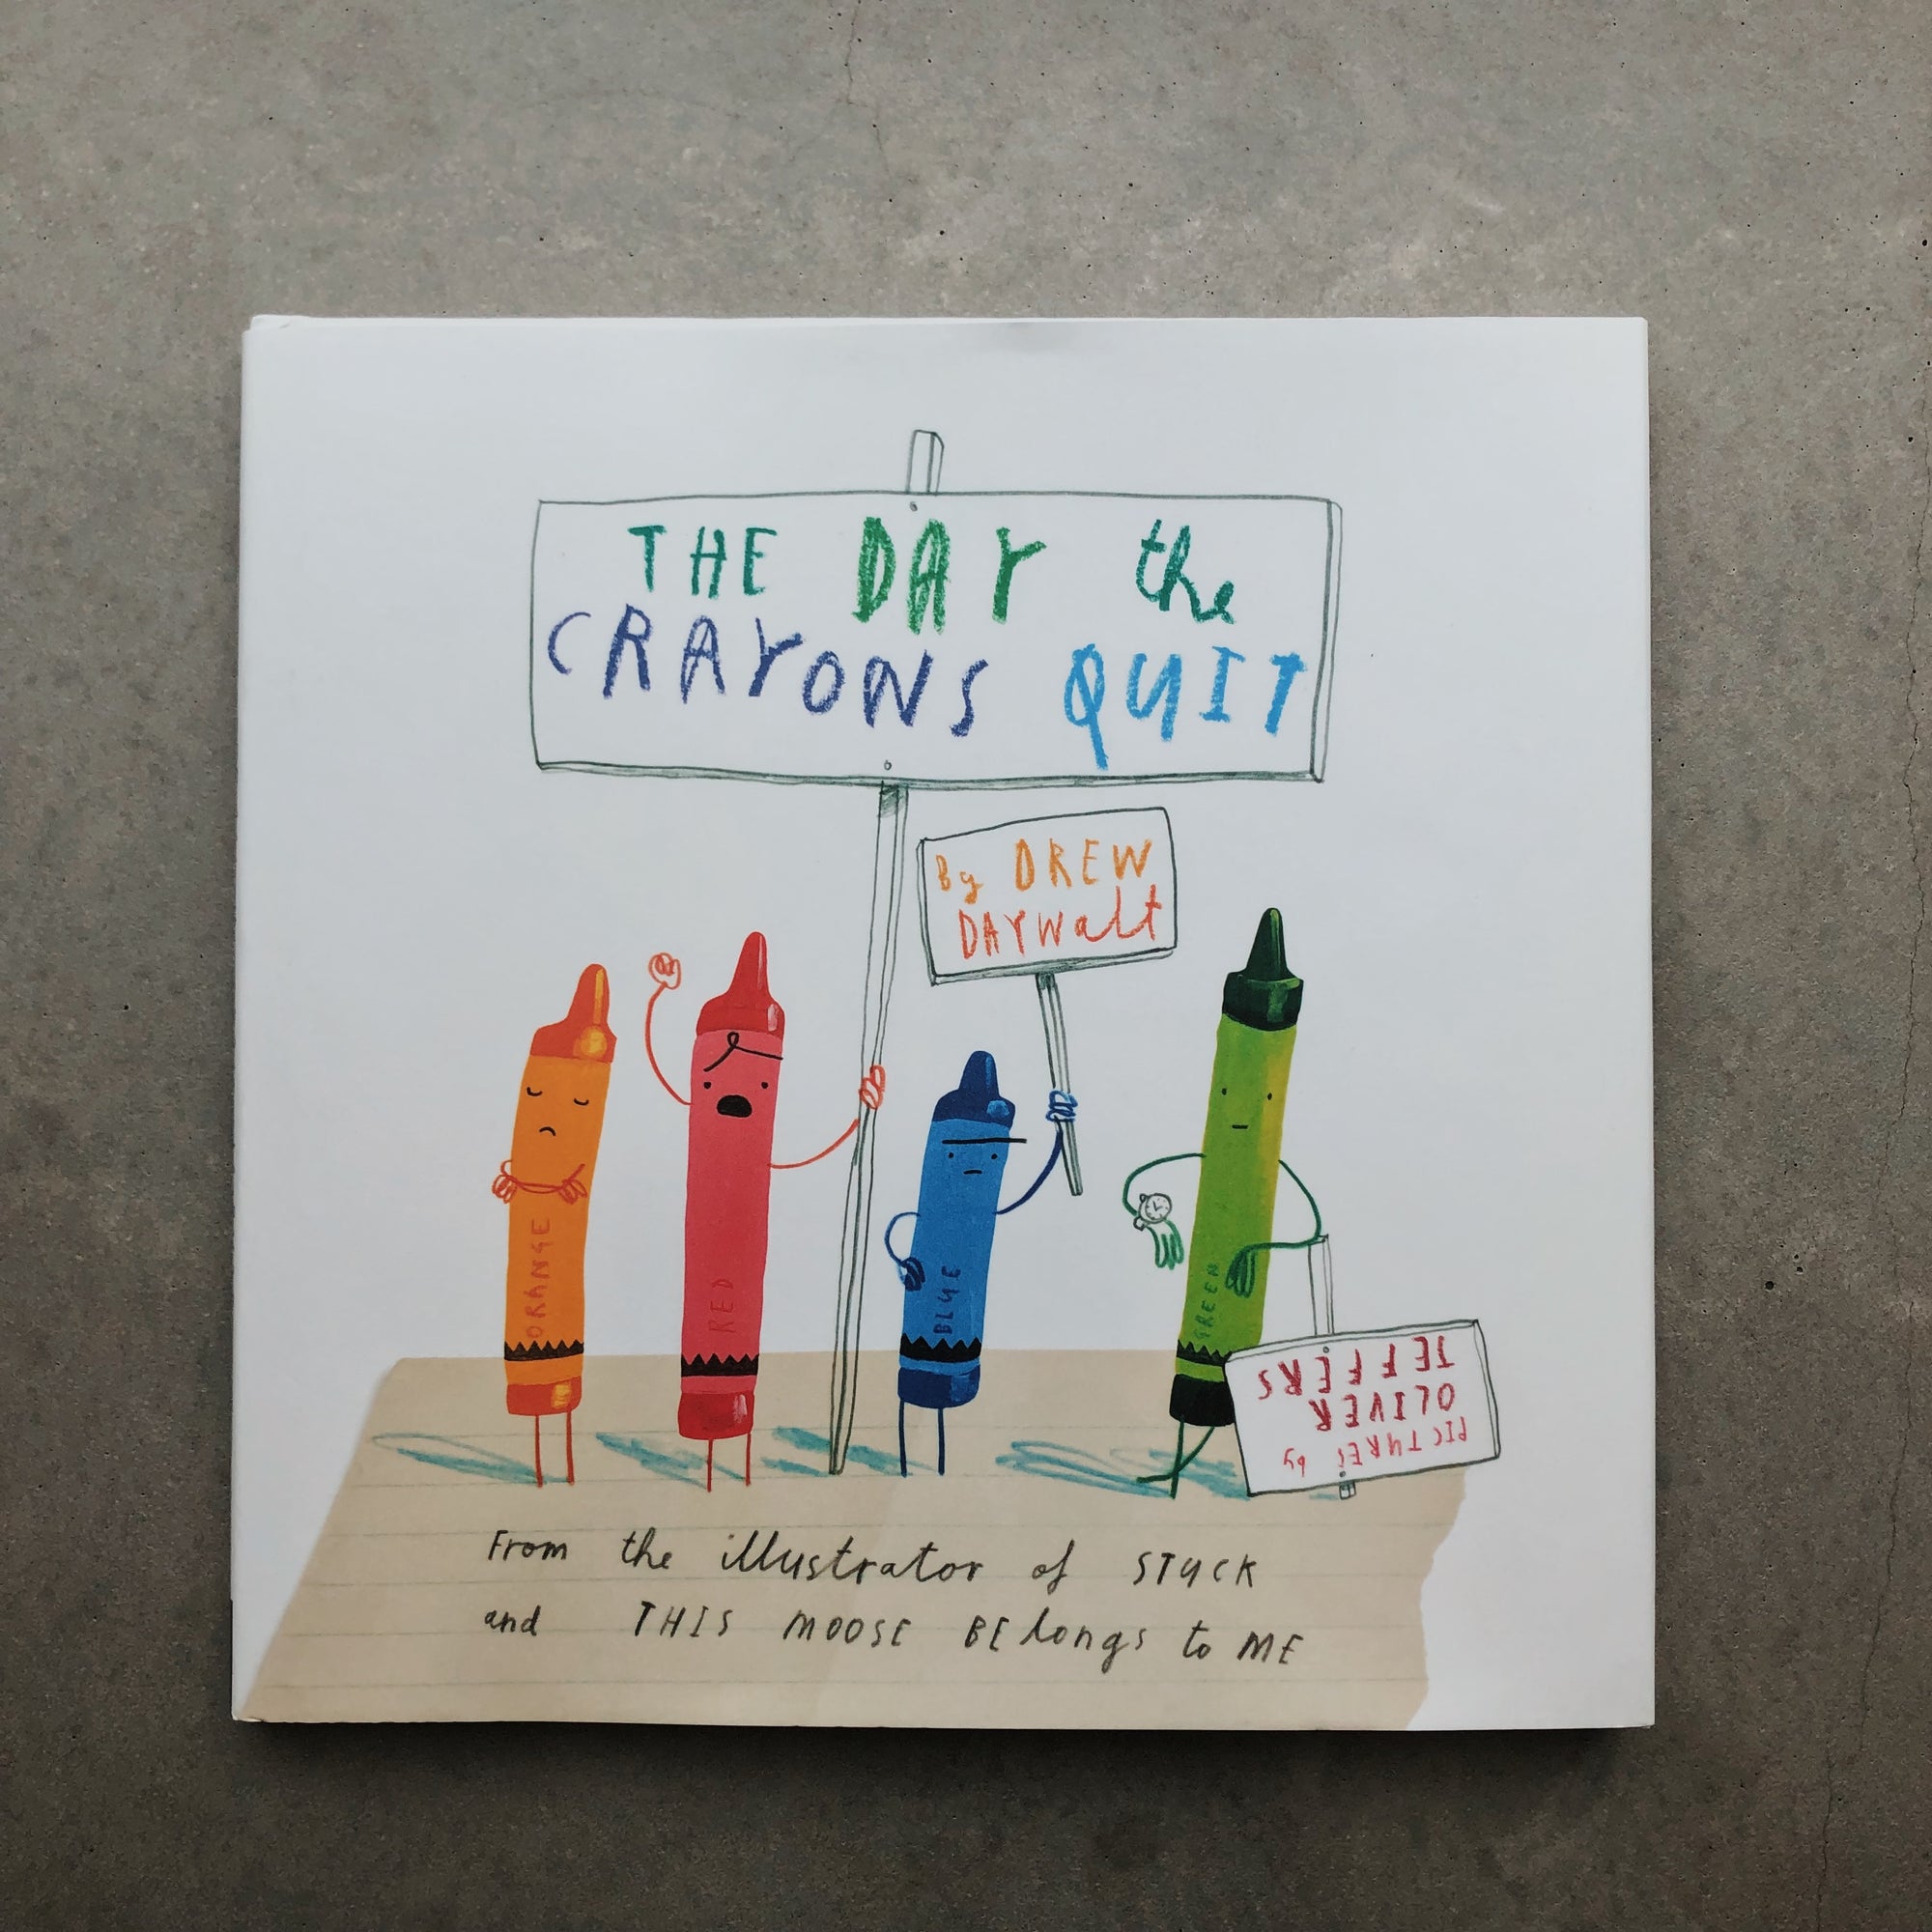 Day the crayons quit